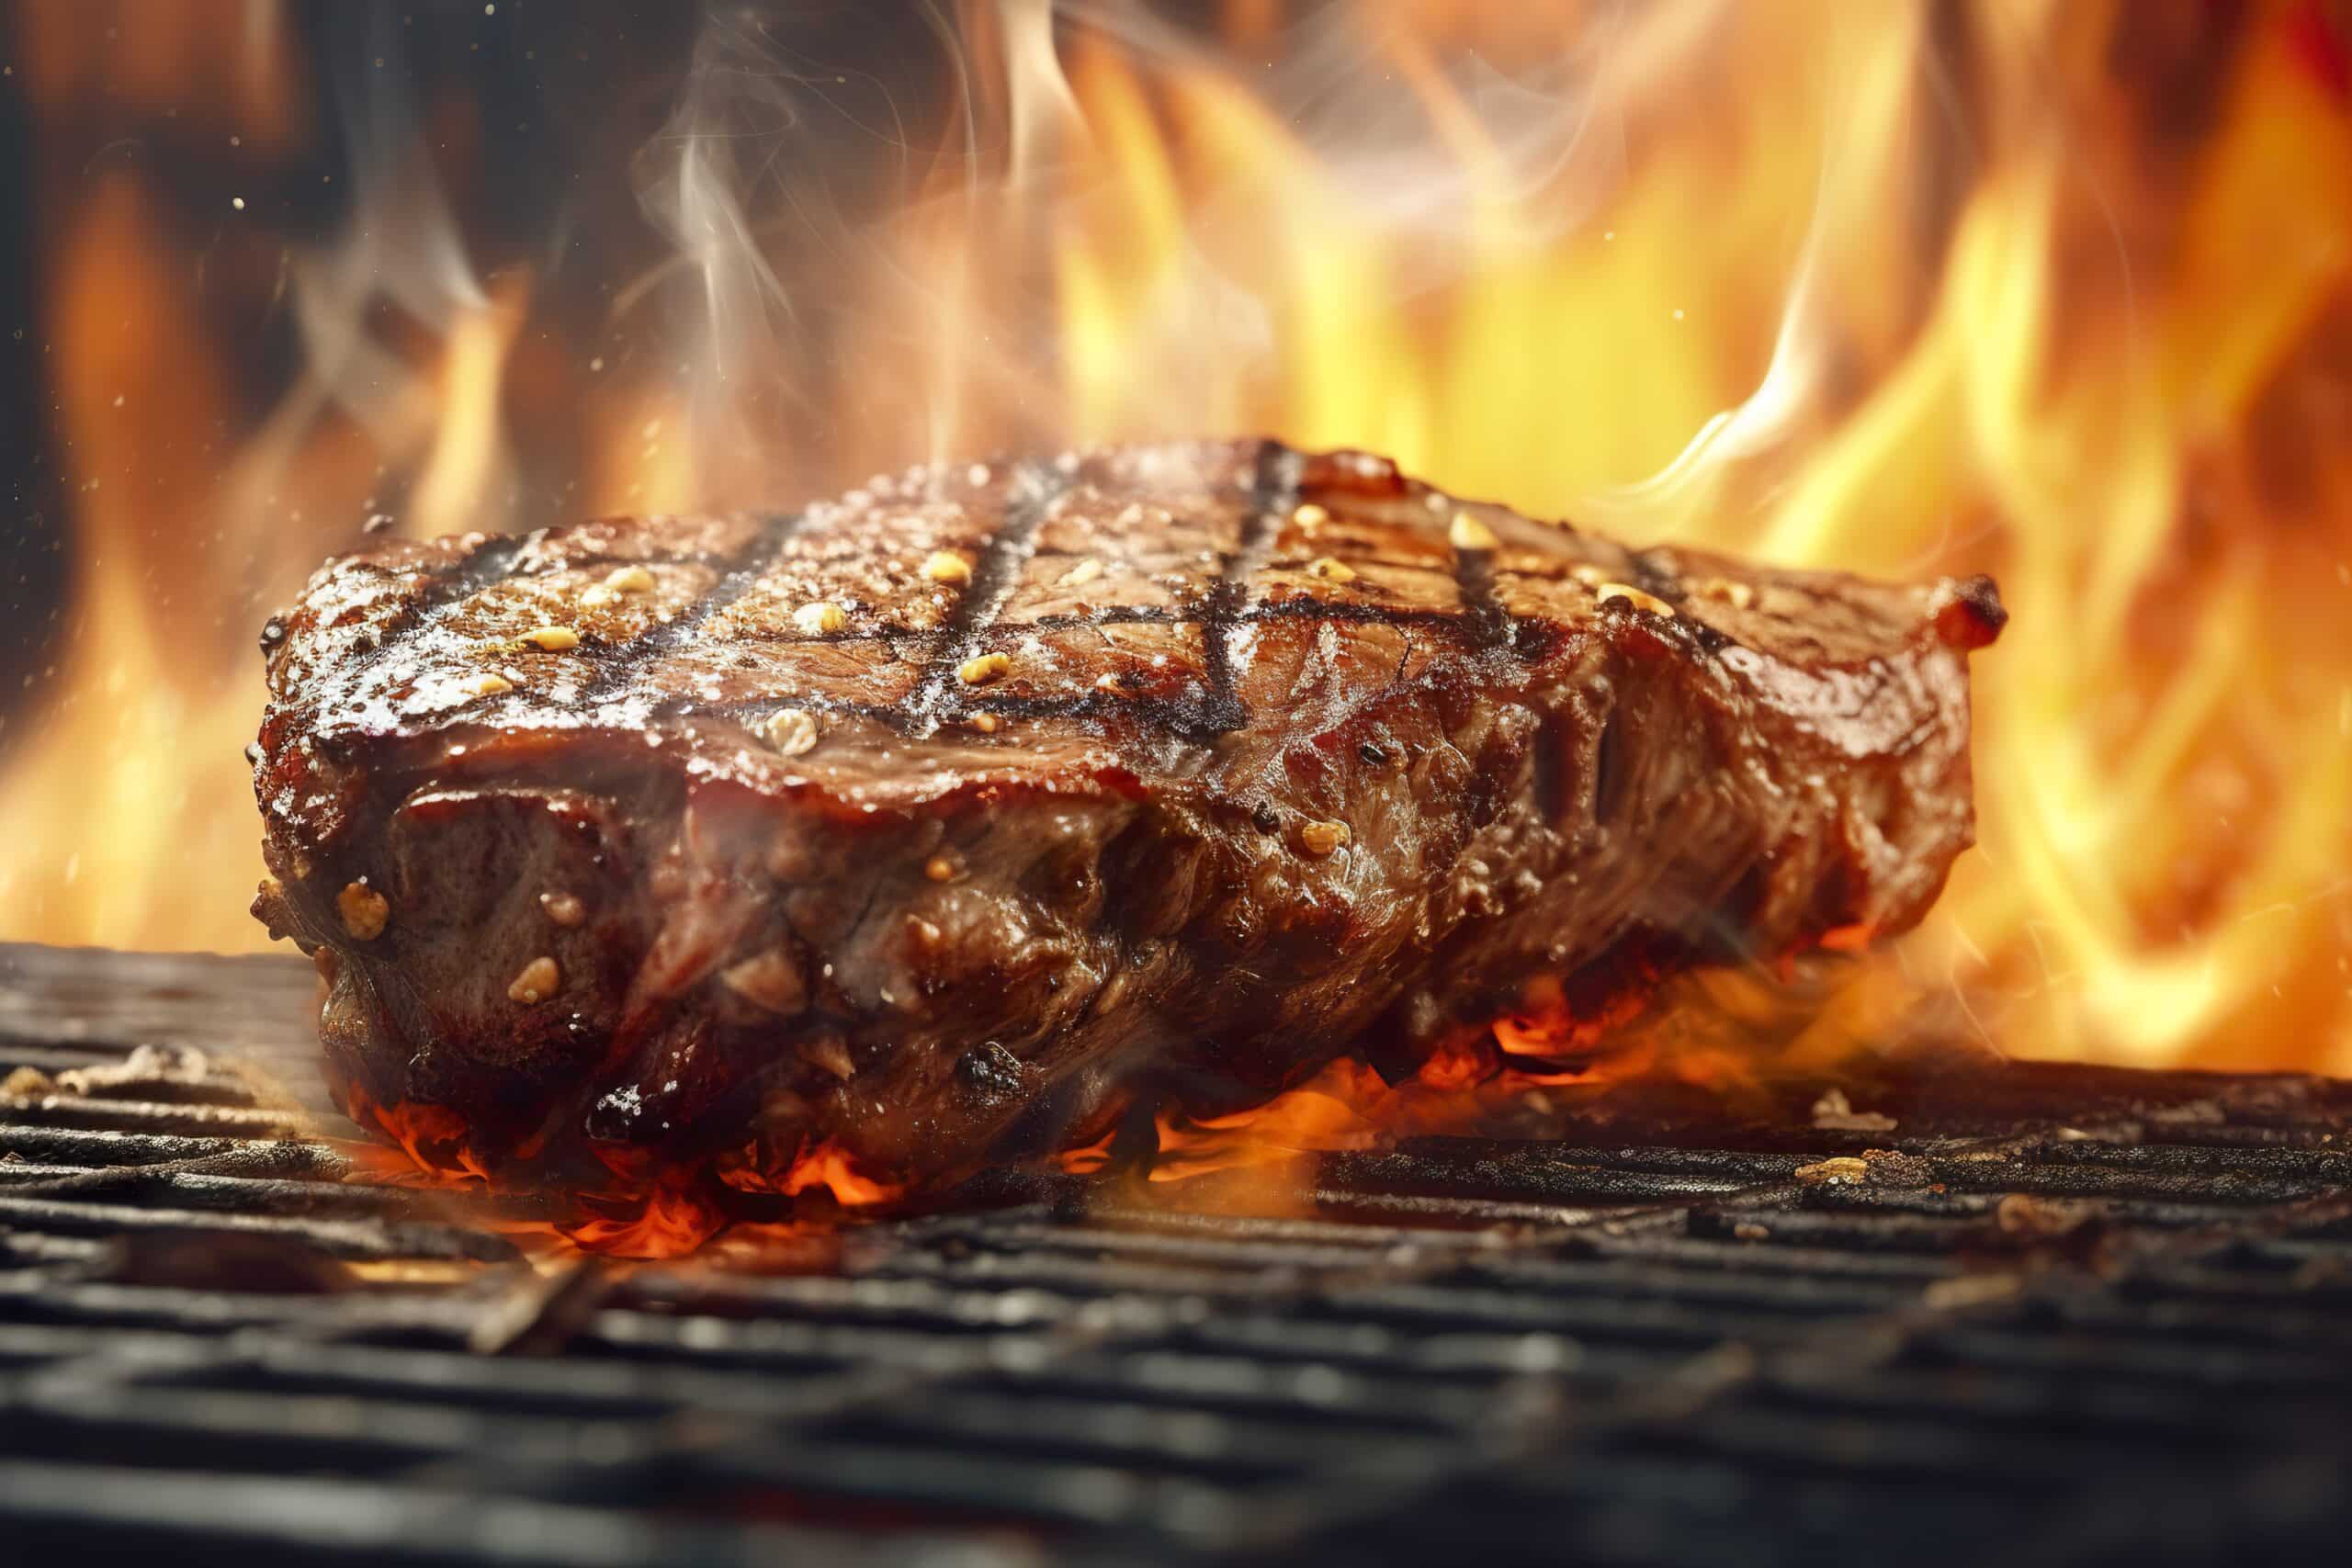 www.appr.com : How To Grill Ribeye On Charcoal?